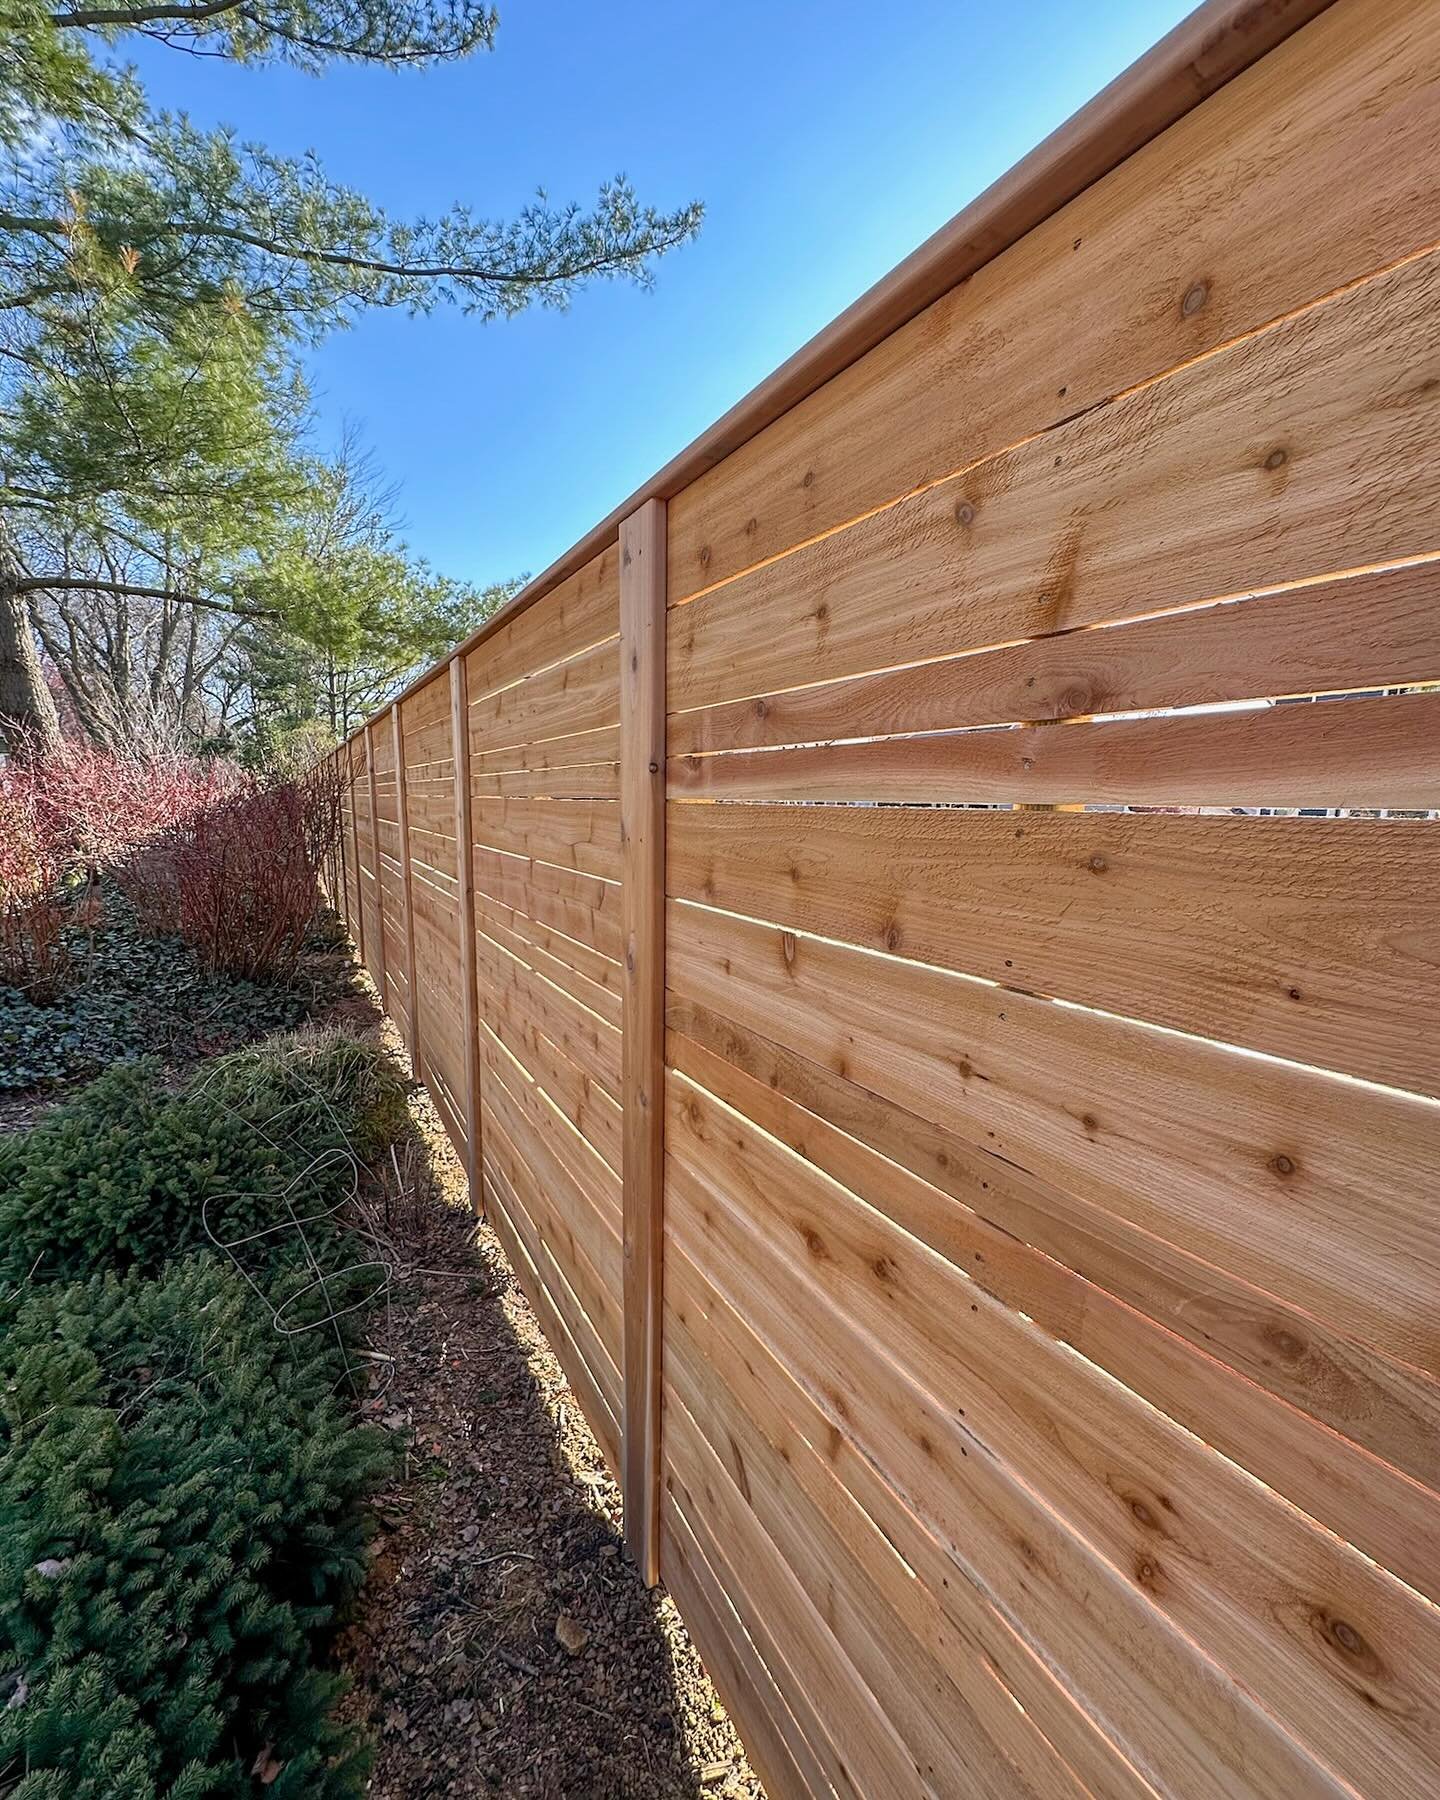 This is NOT your standard privacy fence! 

Check out this 6&rsquo; tall, multi-width, horizontal cedar fence we planted today! If you can dream it, we can build it!
.
.
.
#fence #cedarfence #customfence #horizontalfence #privacyfence #backyard #contr